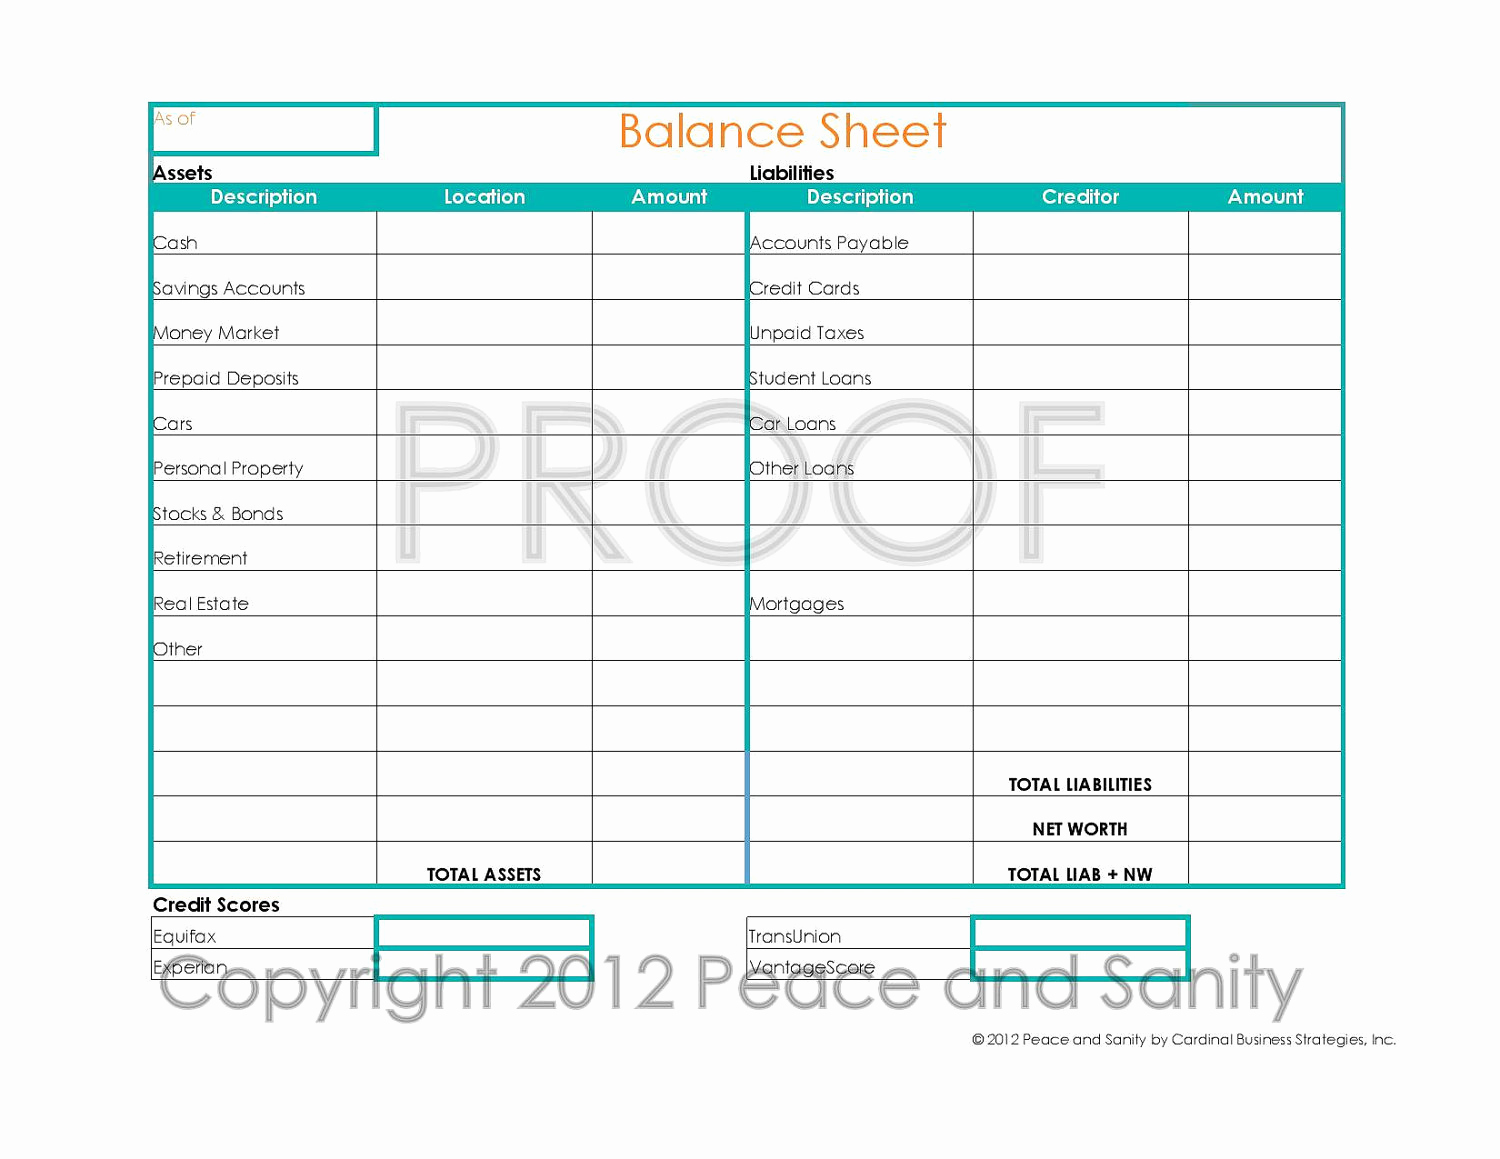 Personal Balance Sheet Example Best Of Personal Balance Sheet Pdf Printable by Peaceandsanity On Etsy